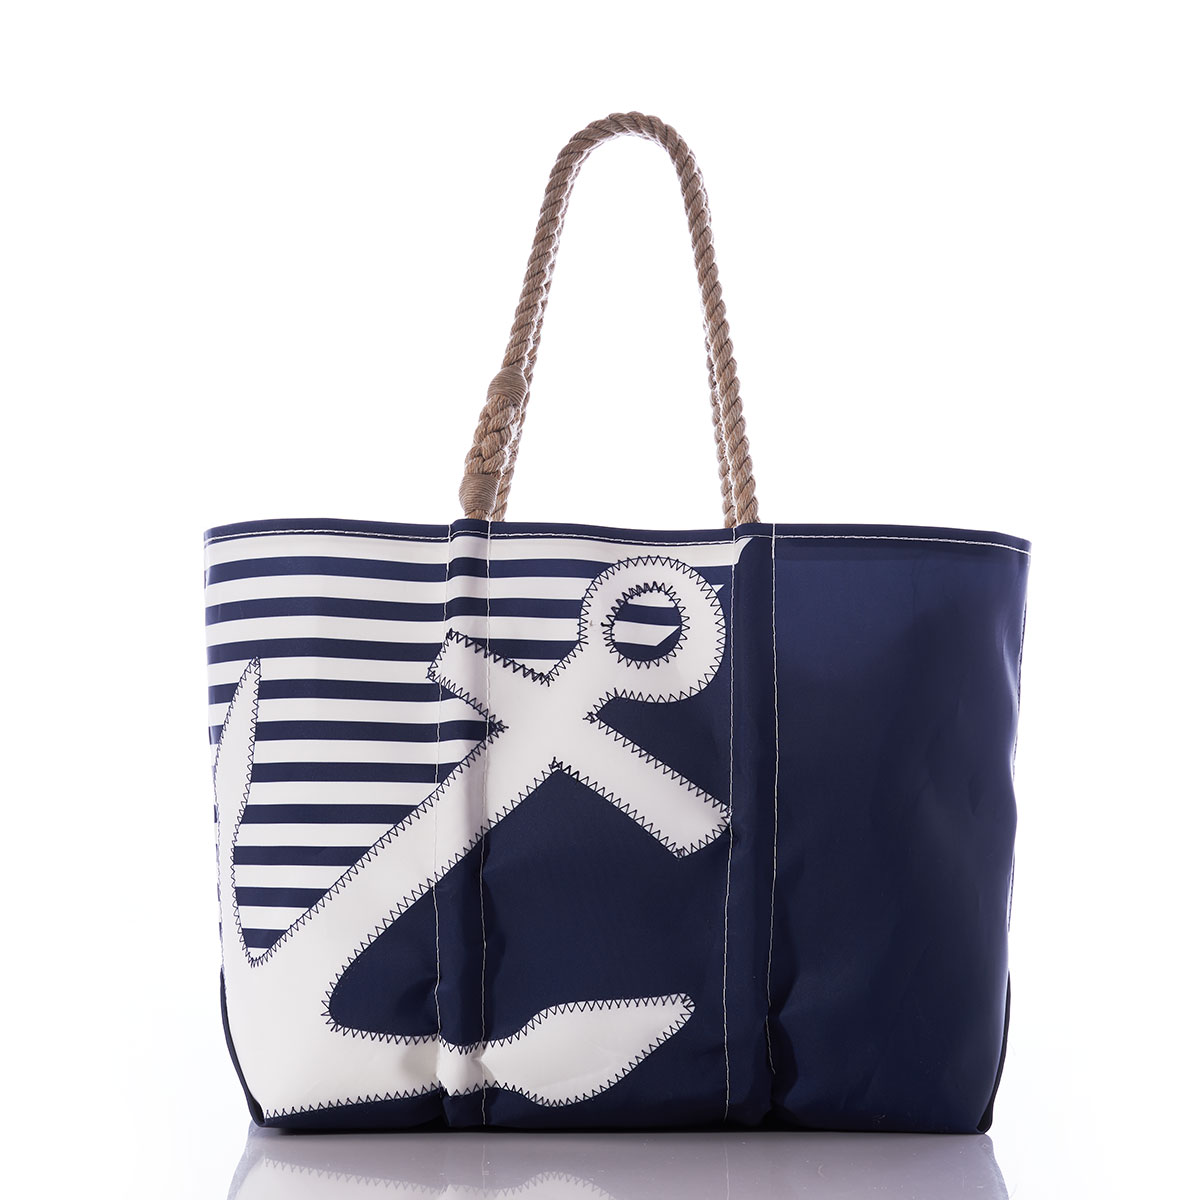  the breton stripe white anchor totes are embellished with a white anchor in front of a solid navy bottom corner and a navy and white striped top corner and hemp rope handles